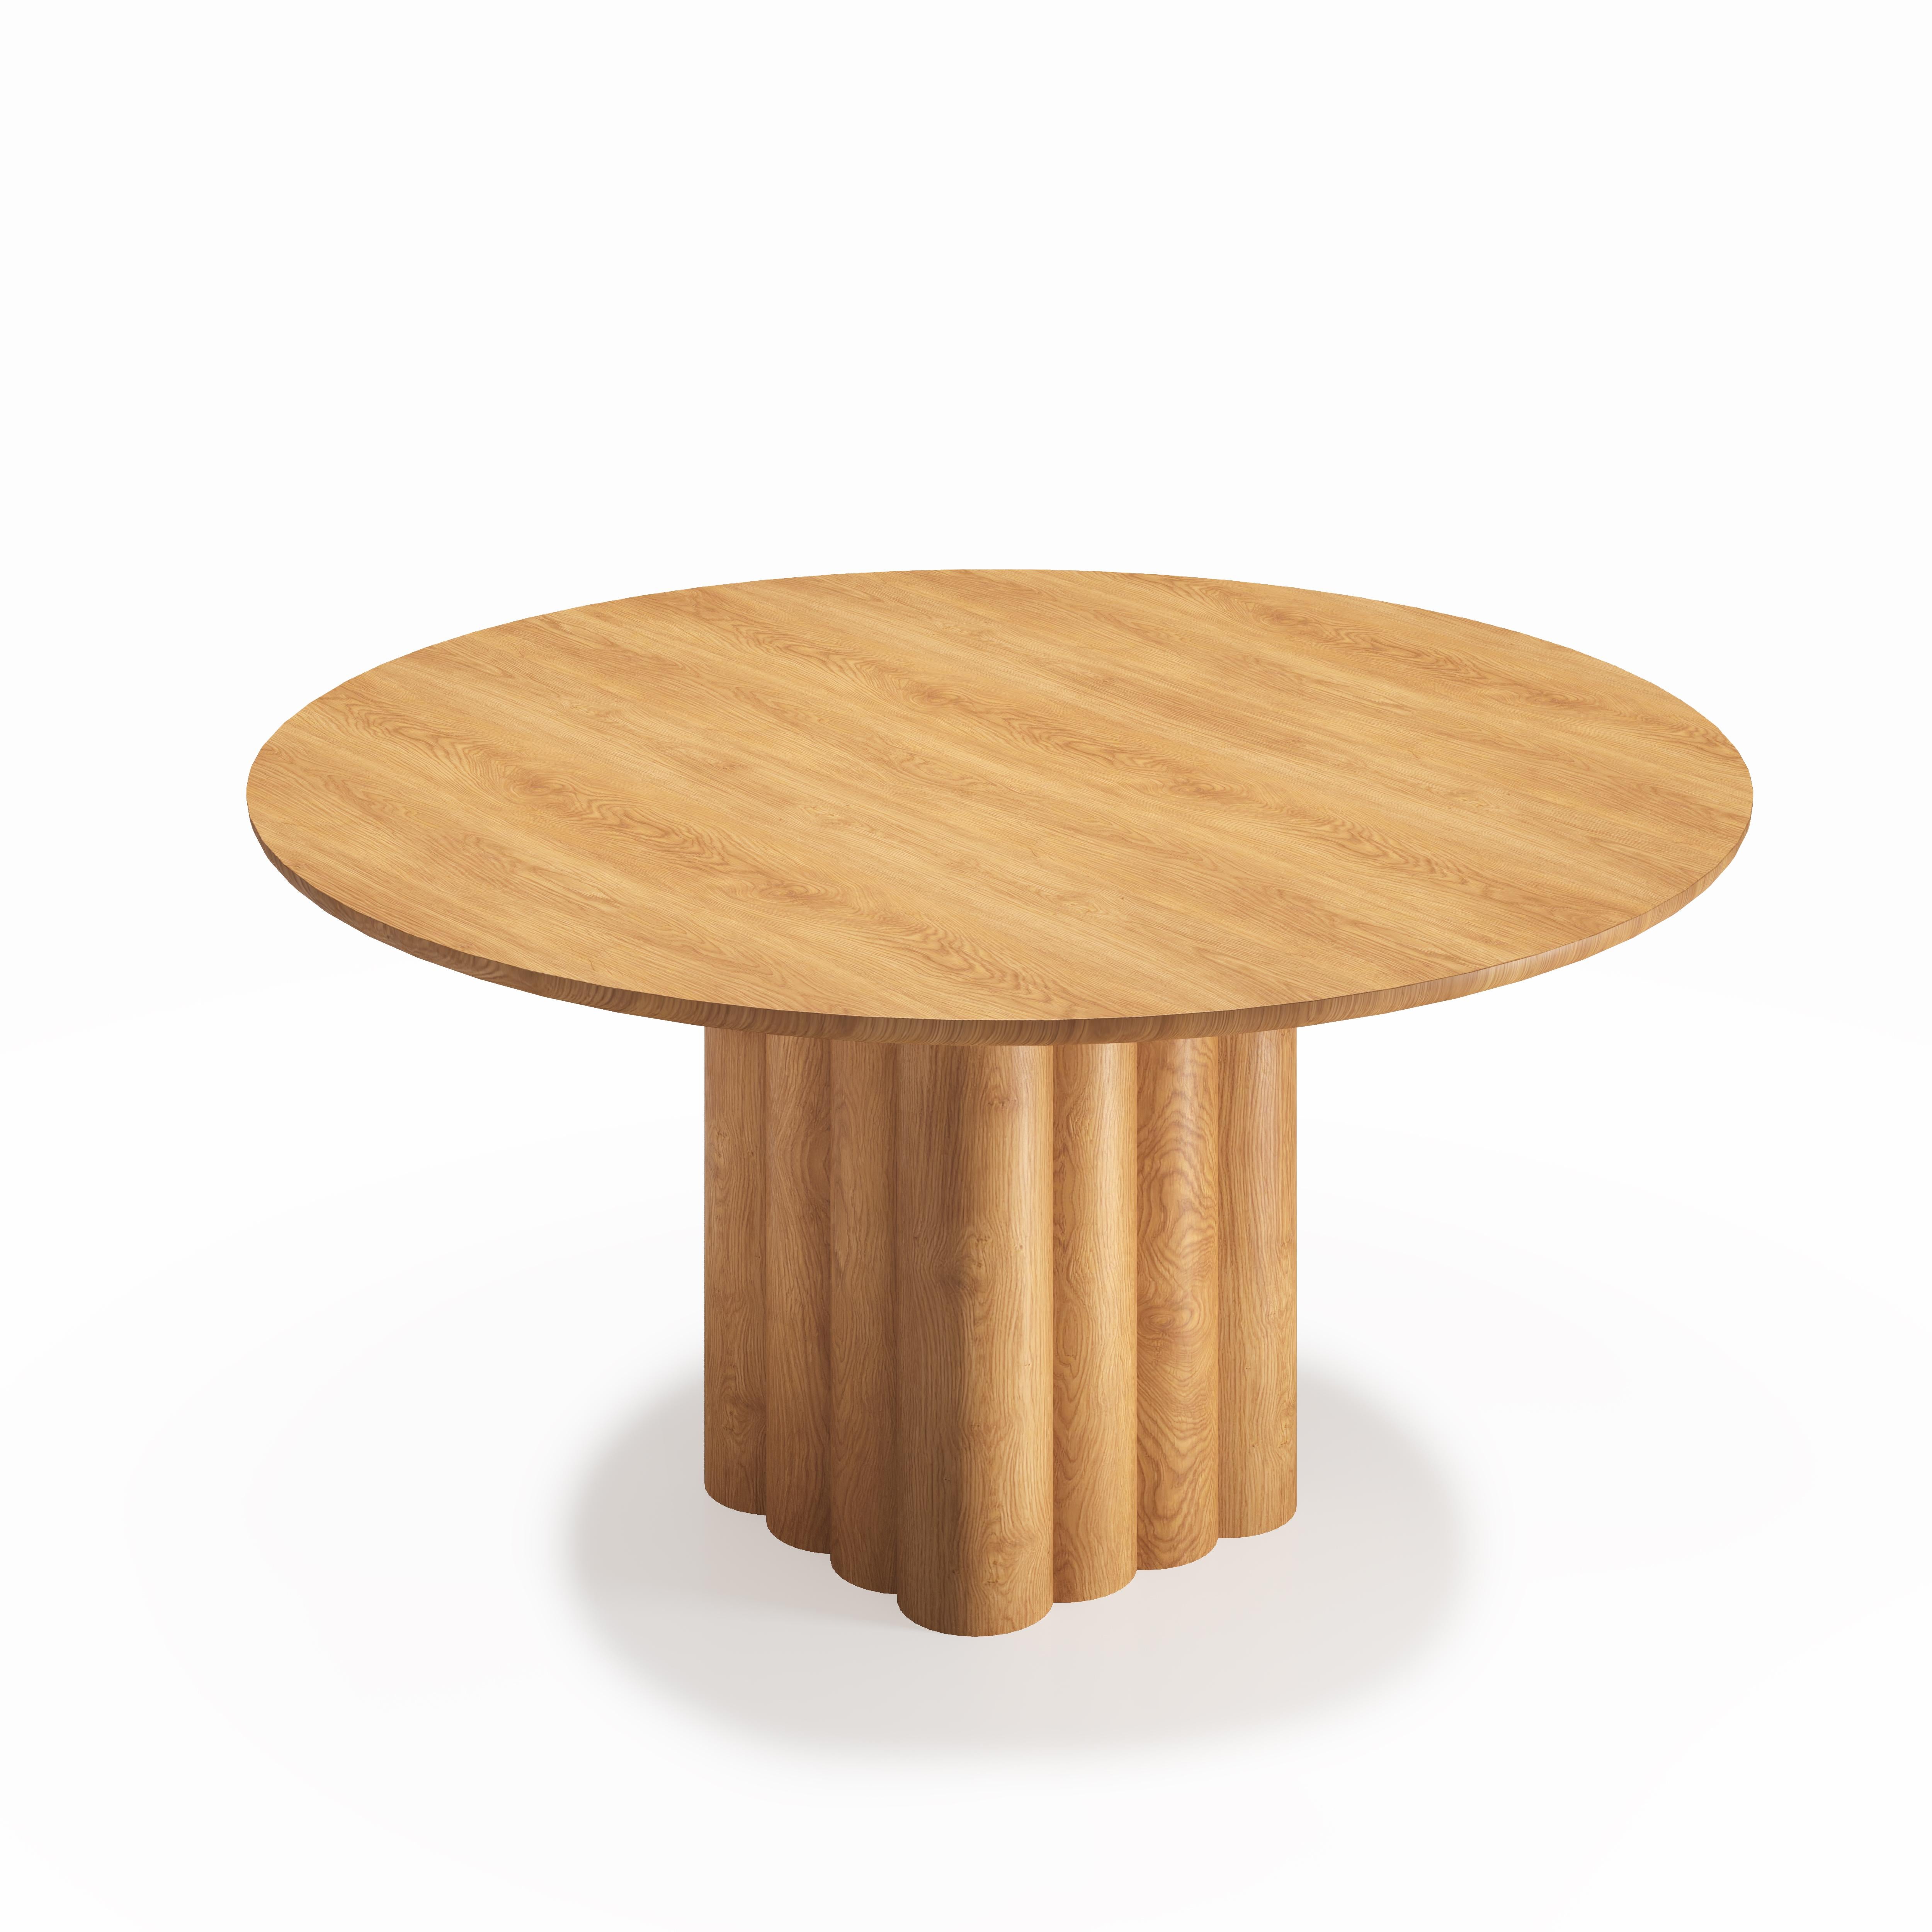 Round Dining Table 'Plush' by Dk3, Smoked Oak or Walnut, 160 cm For Sale 1